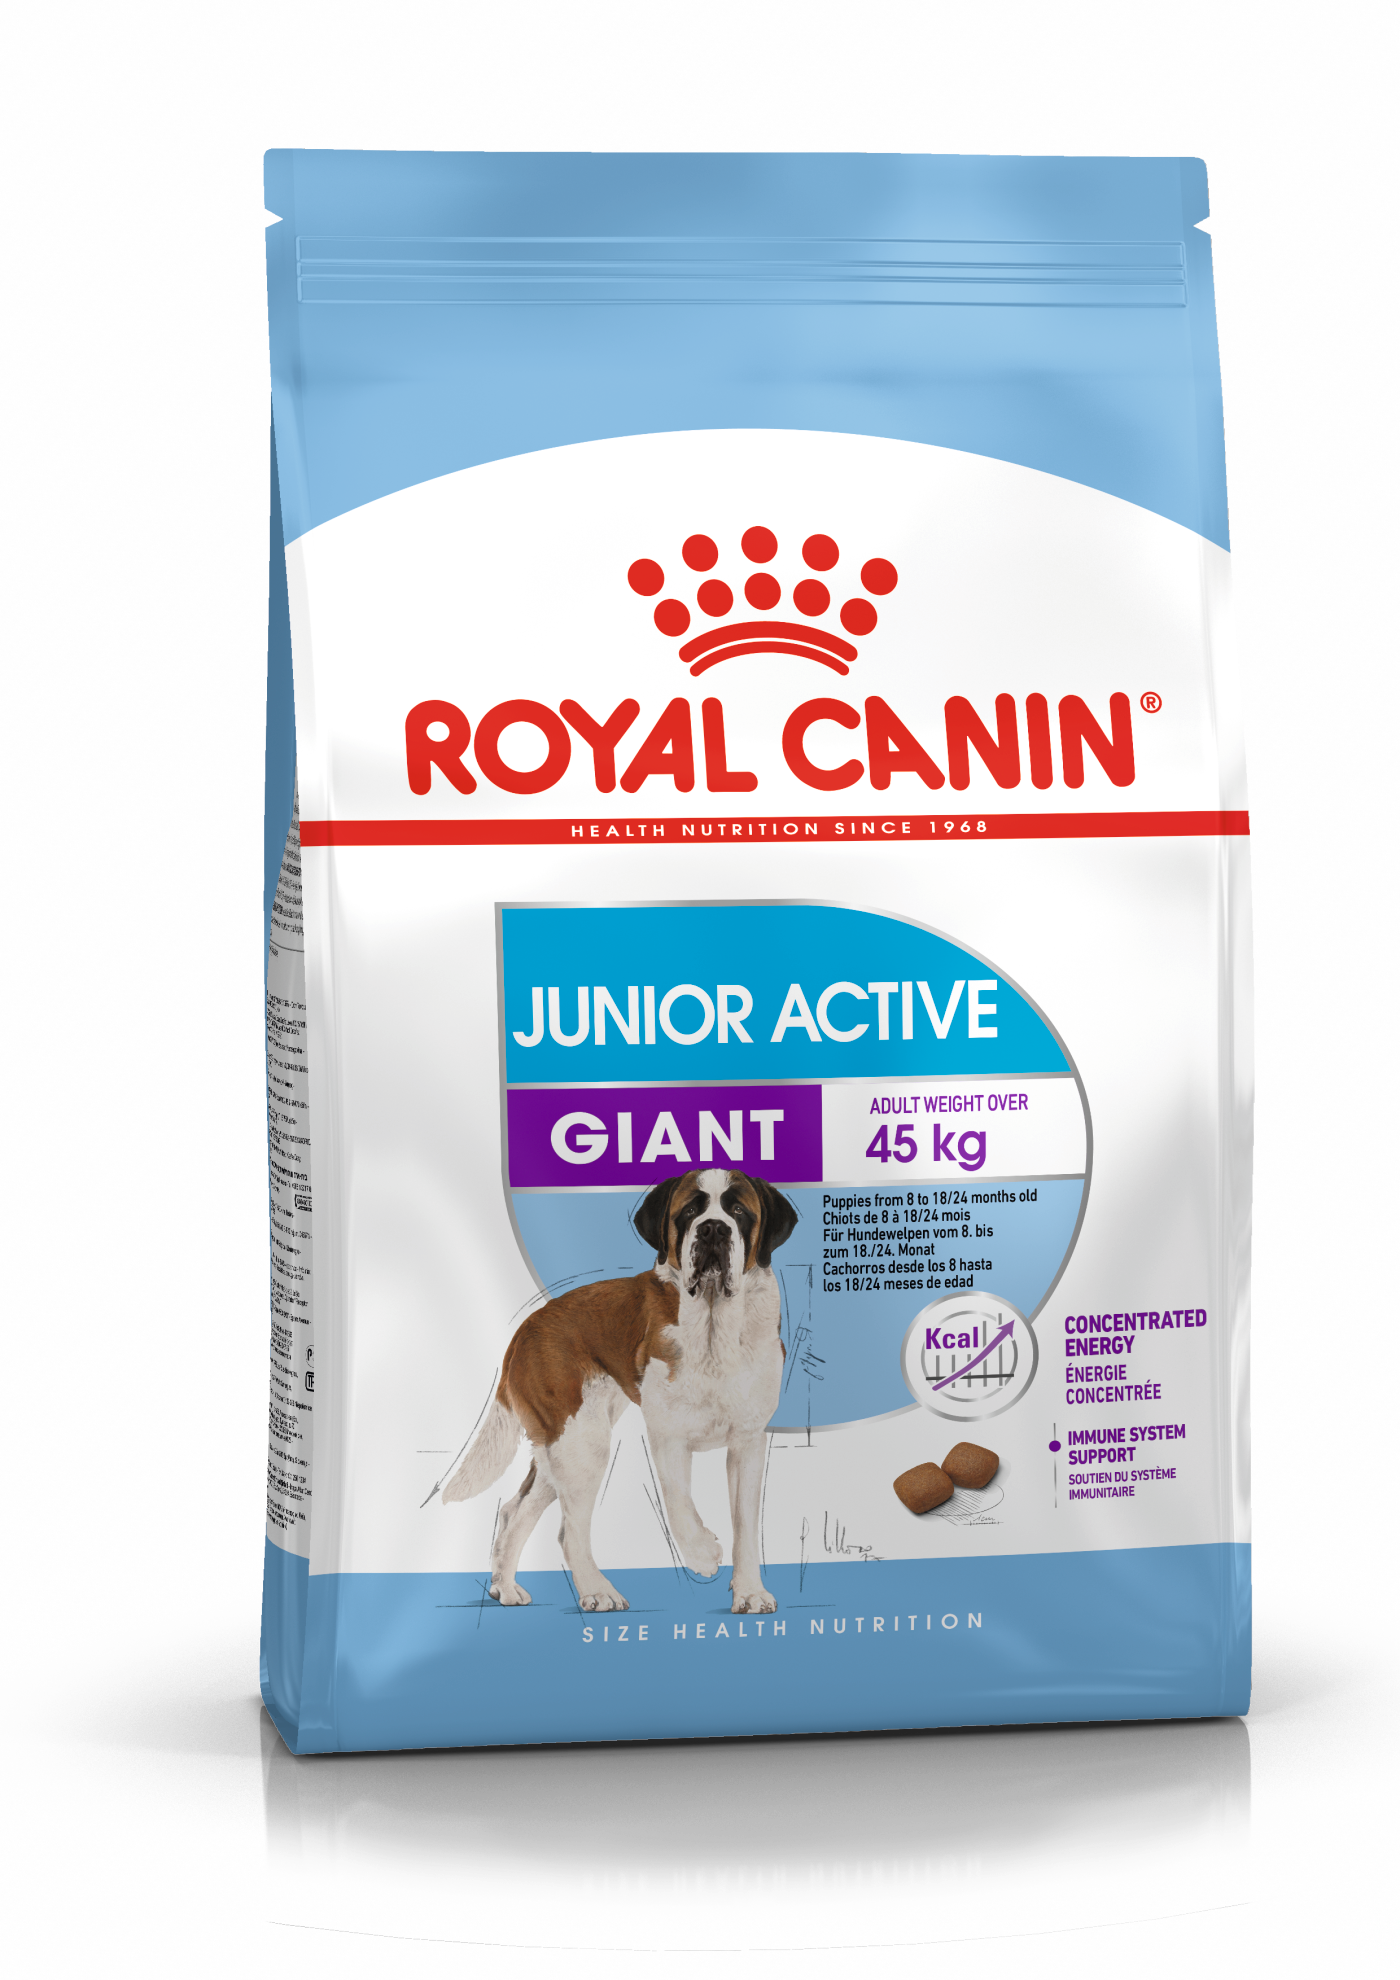 Royal Canin Giant Junior Active